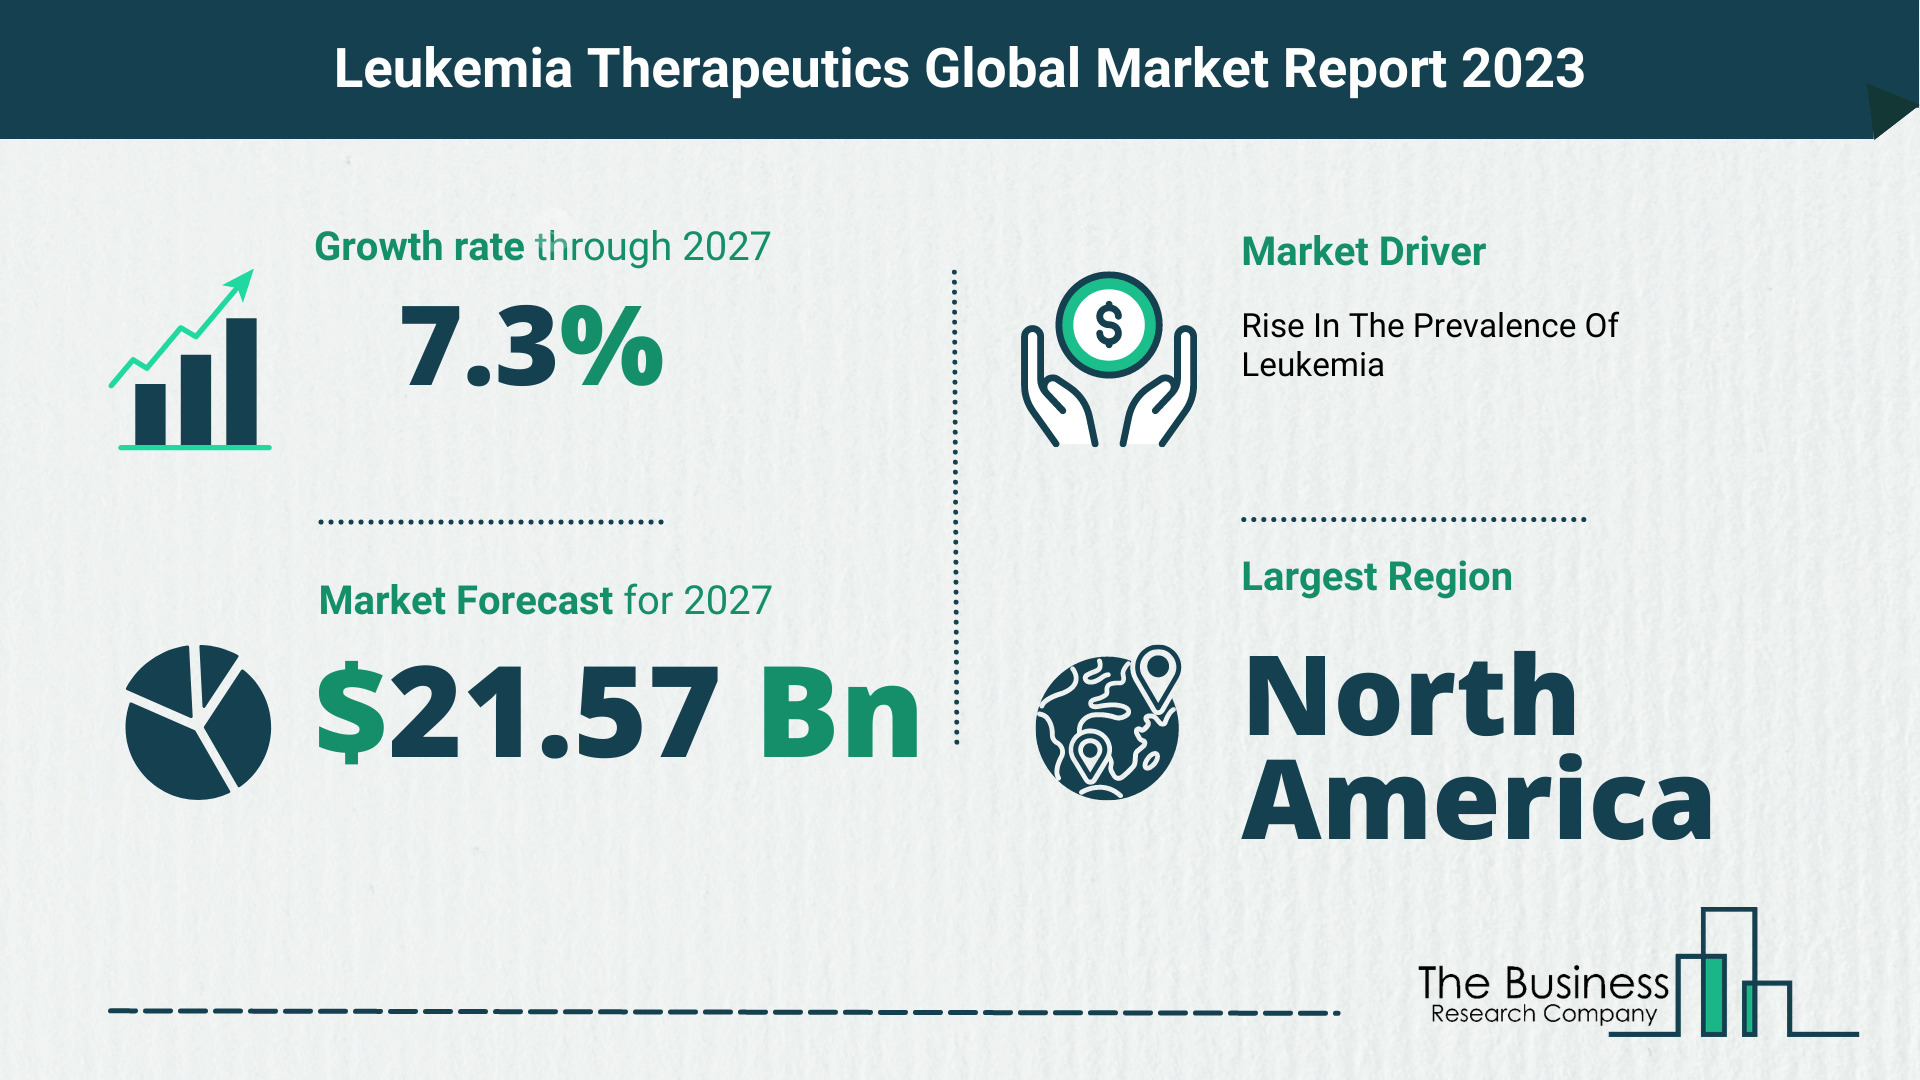 What Will The Leukemia Therapeutics Market Look Like In 2023?